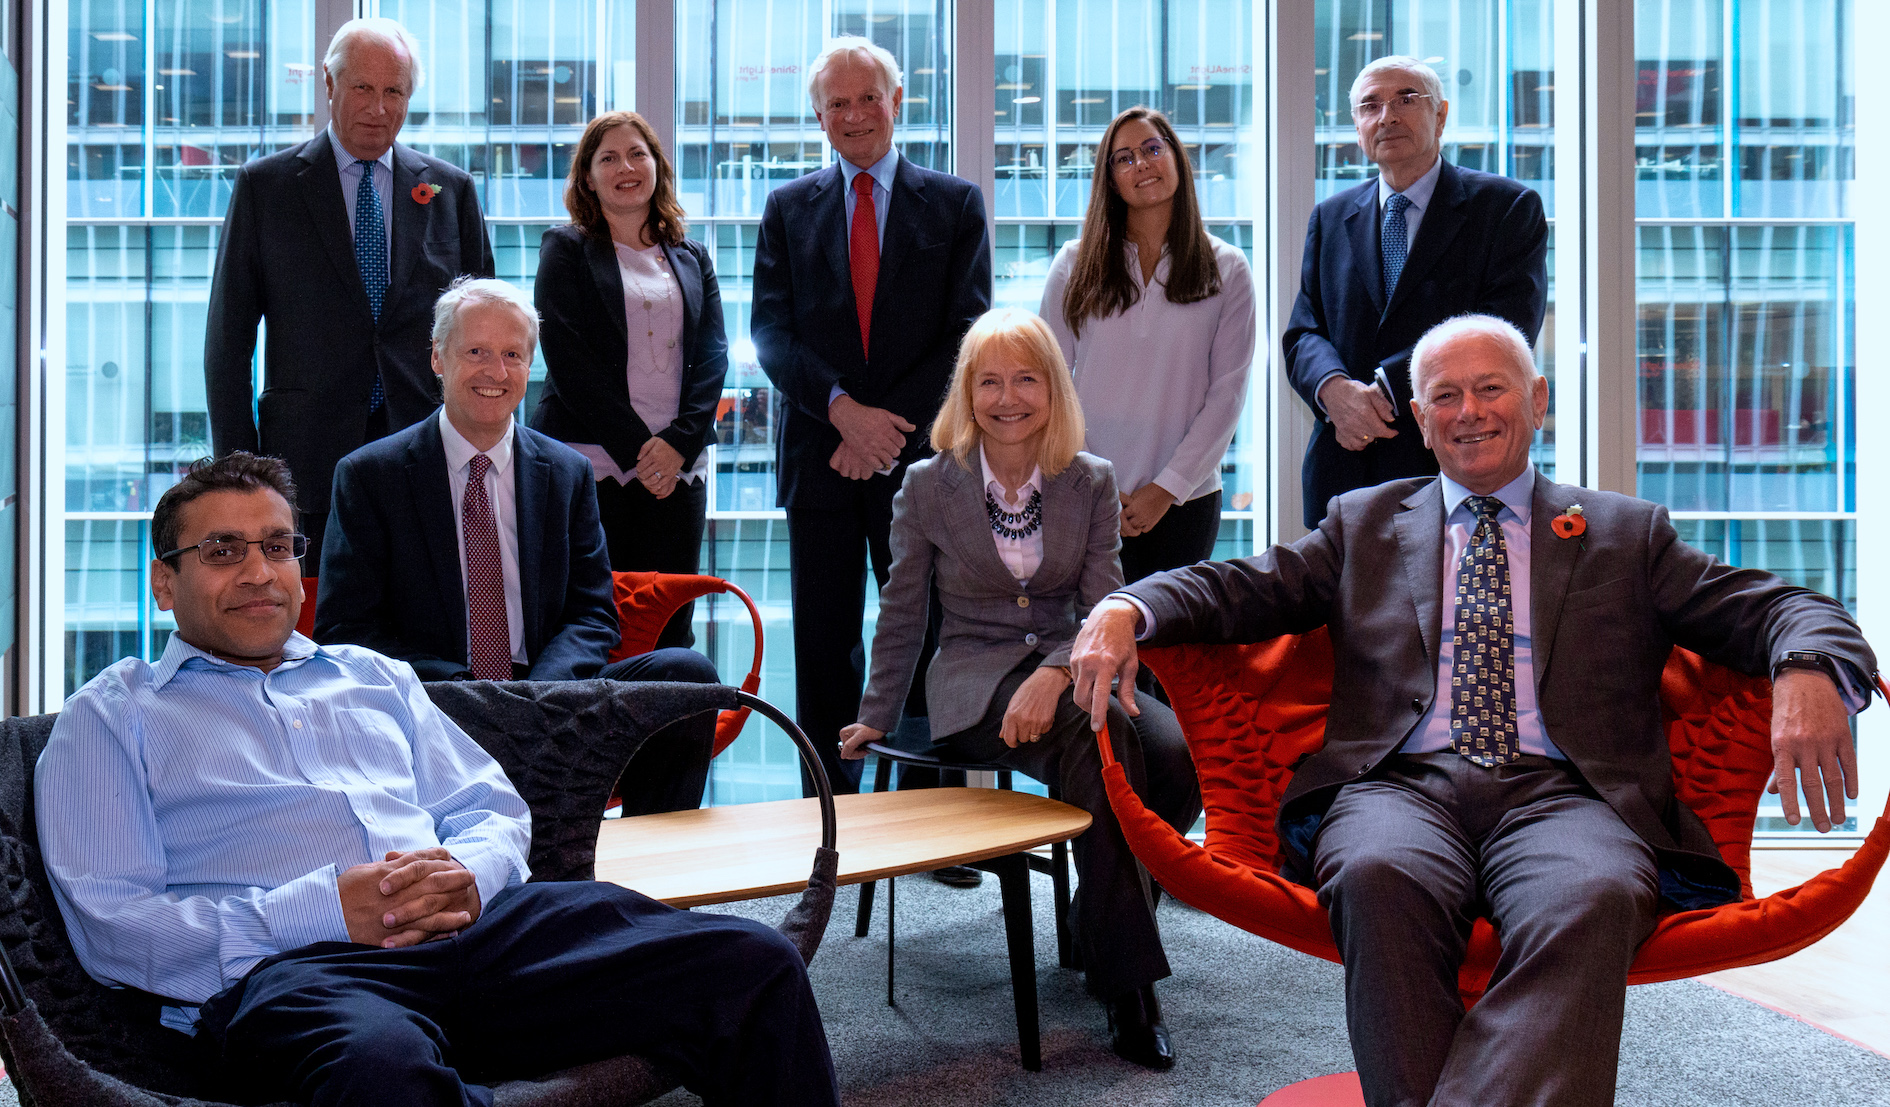 AbilityNet's Board of Trustees sitting together at a Board meeting in October 2018